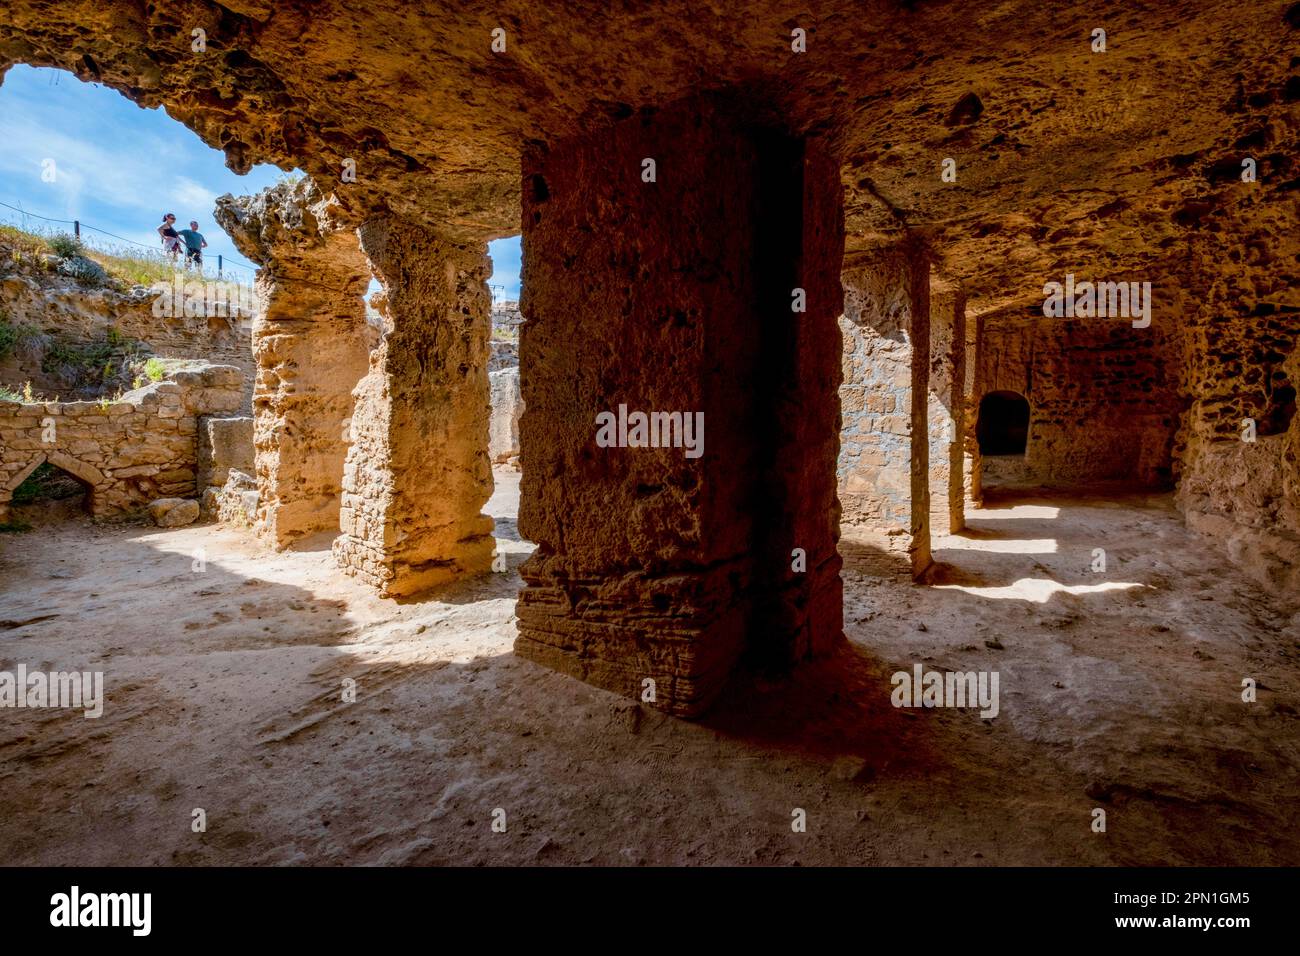 Tomb of the Kings archaeological site, Kato Paphos, Paphos, Cyprus. Stock Photo